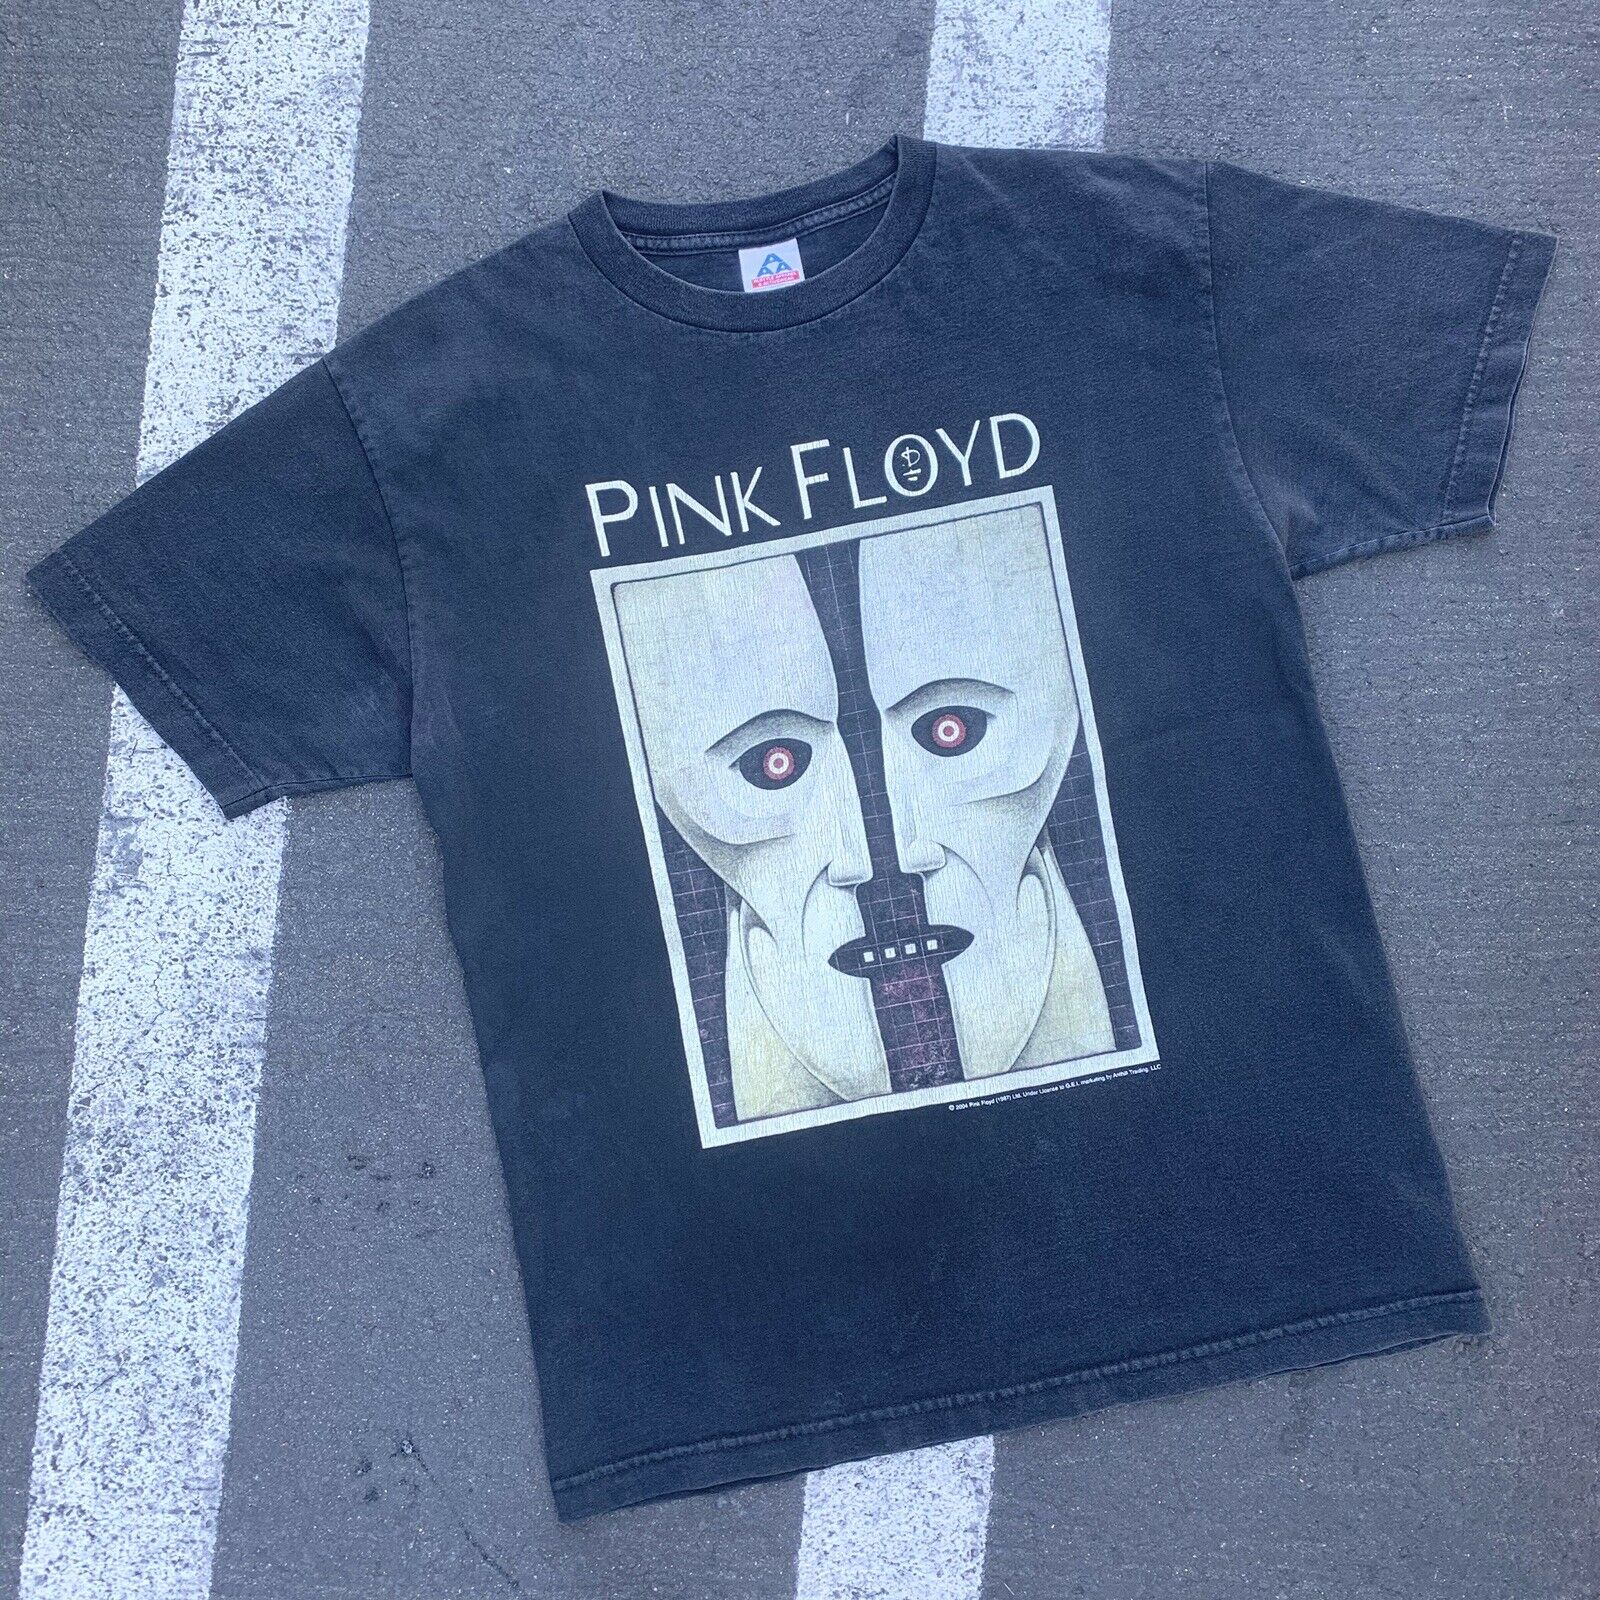 Vintage T-Shirt / ヴィンテージ Tシャツ】PINK FLOYD DIVISION BELL